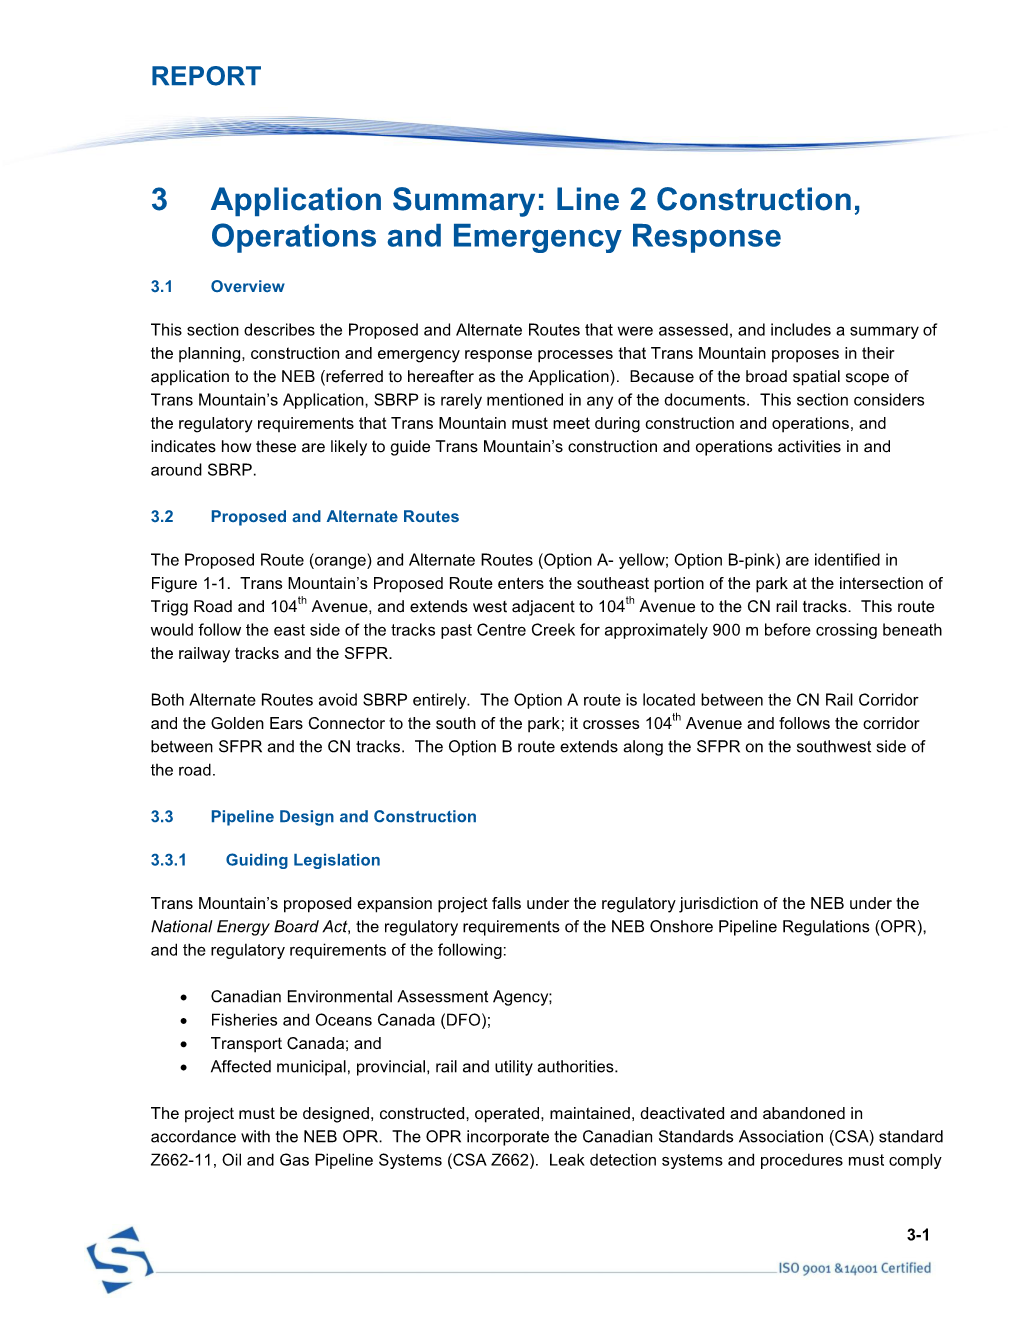 Line 2 Construction, Operations and Emergency Response